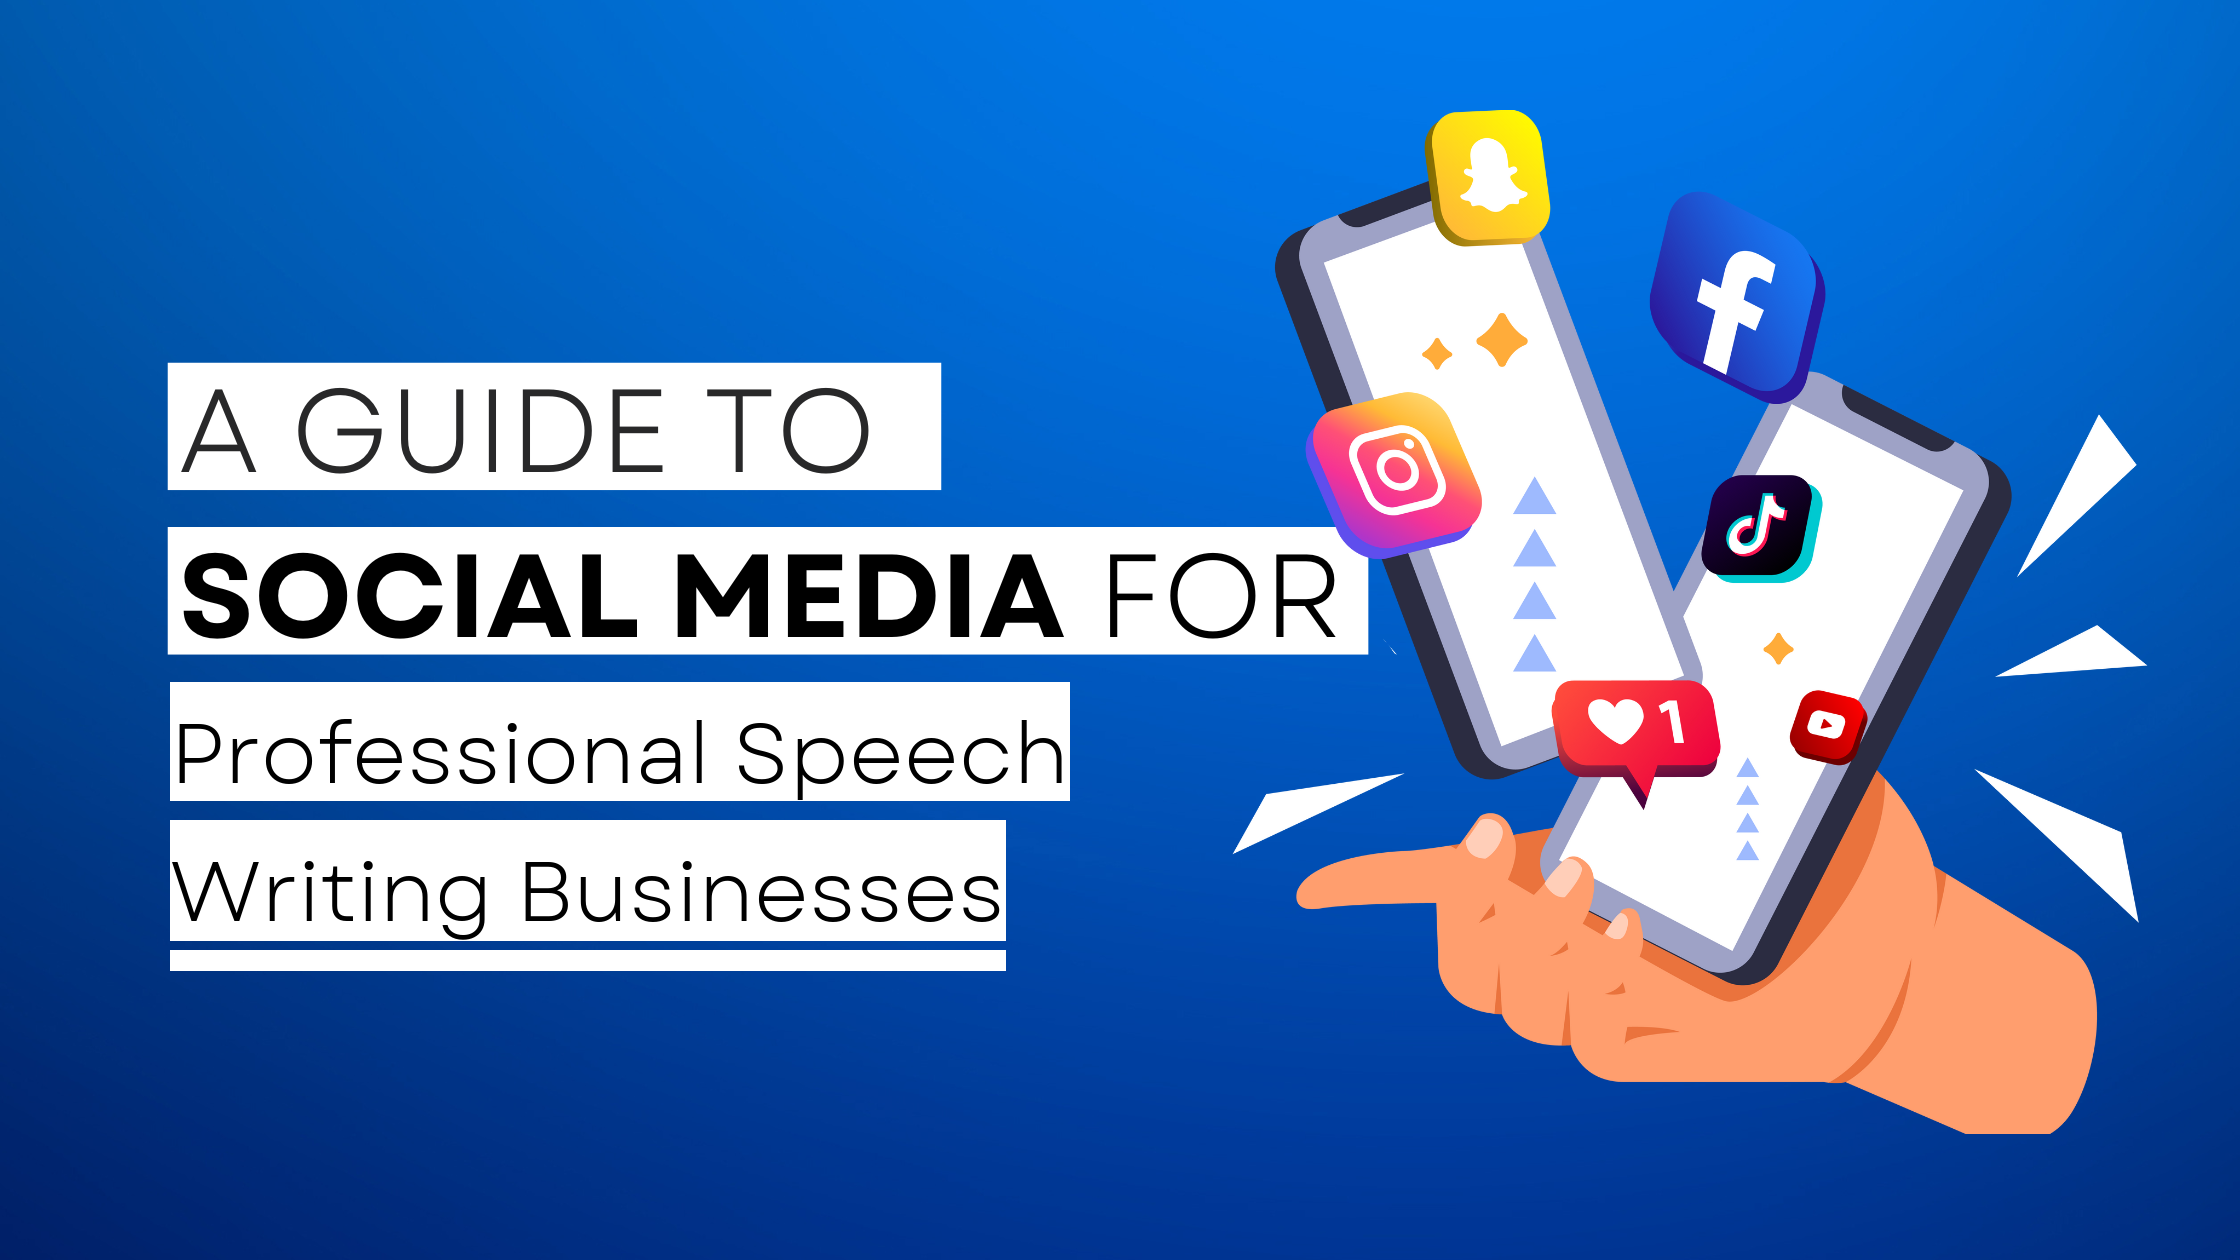 How to start Professional Speech Writing  on social media